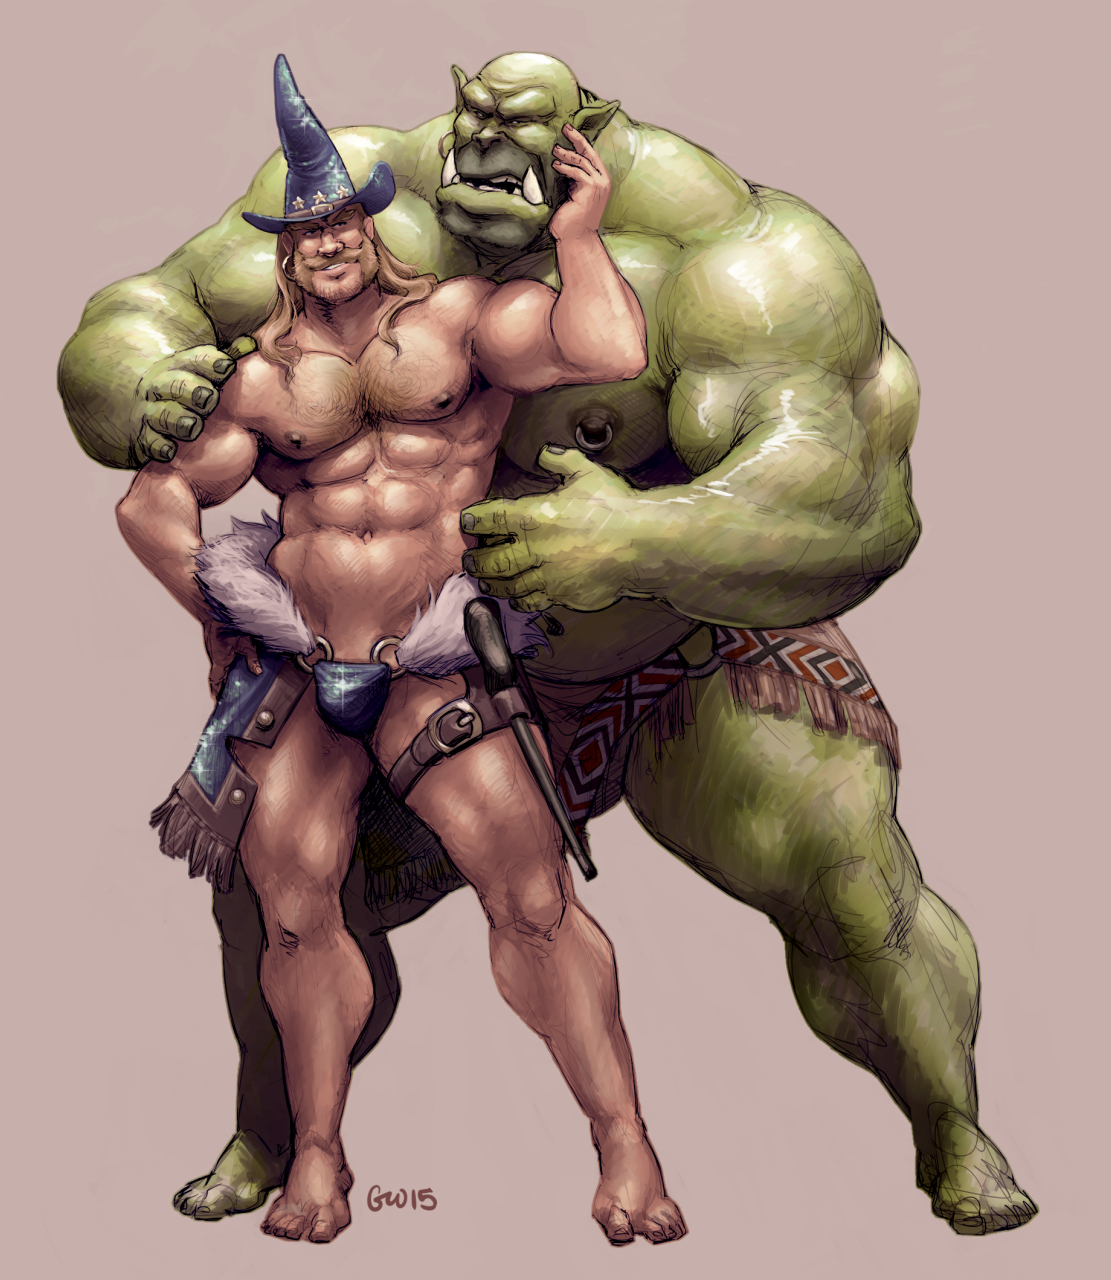 All orcs are bottom - Orc thread.